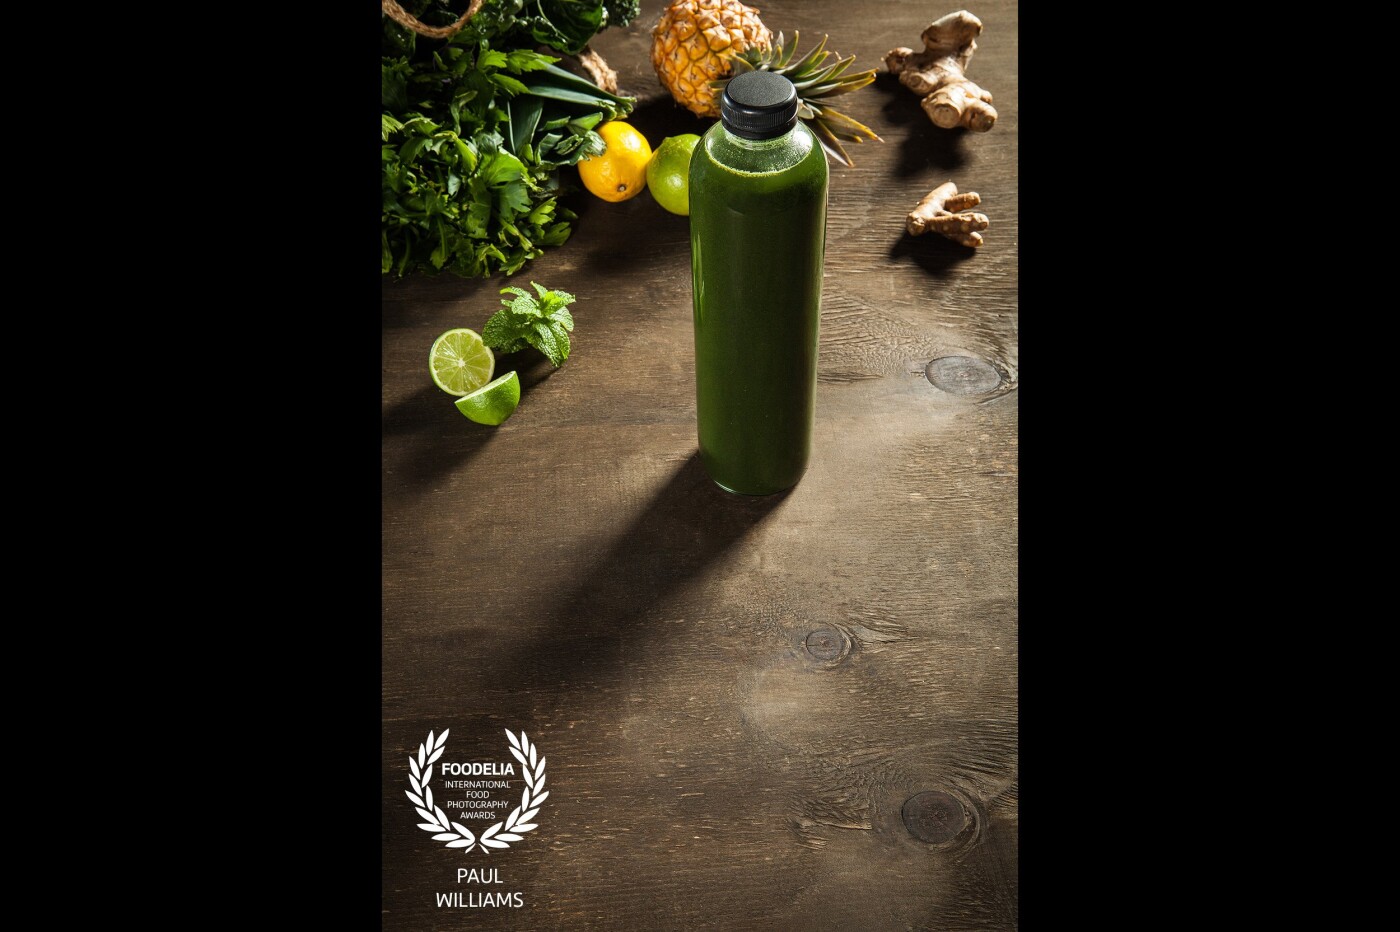 A simple hero shot of a green smoothie mix that leaves plenty of negative space for the designer to work their magic.<br />
As an ex-designer, I know how important it is to leave some breathing room in my shots for cropping options, as well as negative space to reverse text against, for instance.<br />
As photographers, it's so important that we give consideration to not just our shot, but how that shot will be applied to the marketing collateral and how we can give our client/creative agency some latitude to work with our shots.